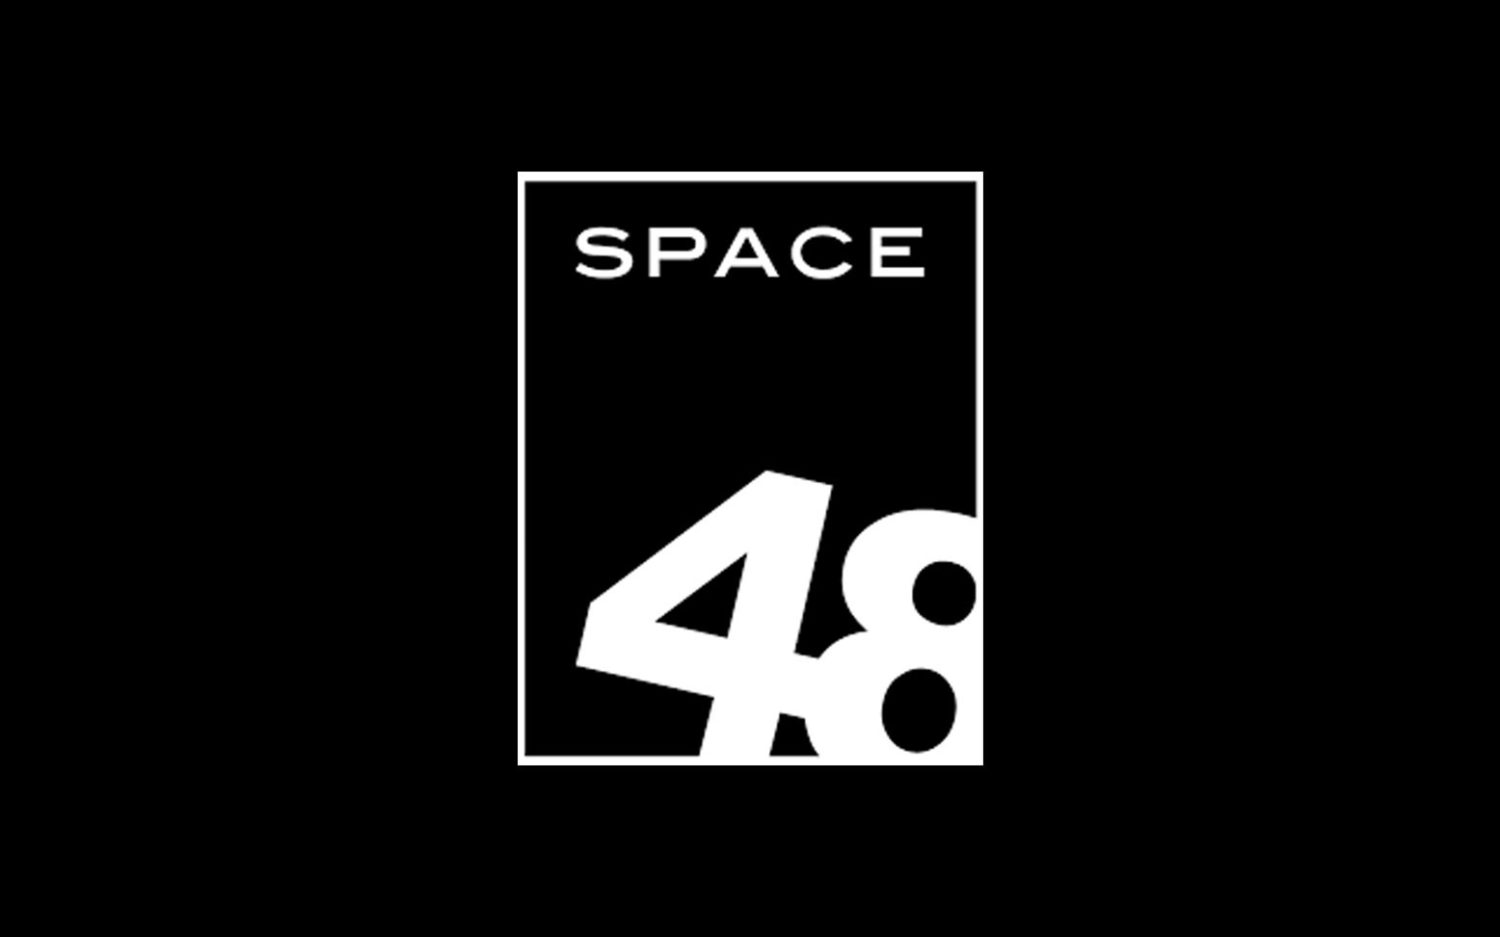 space 48